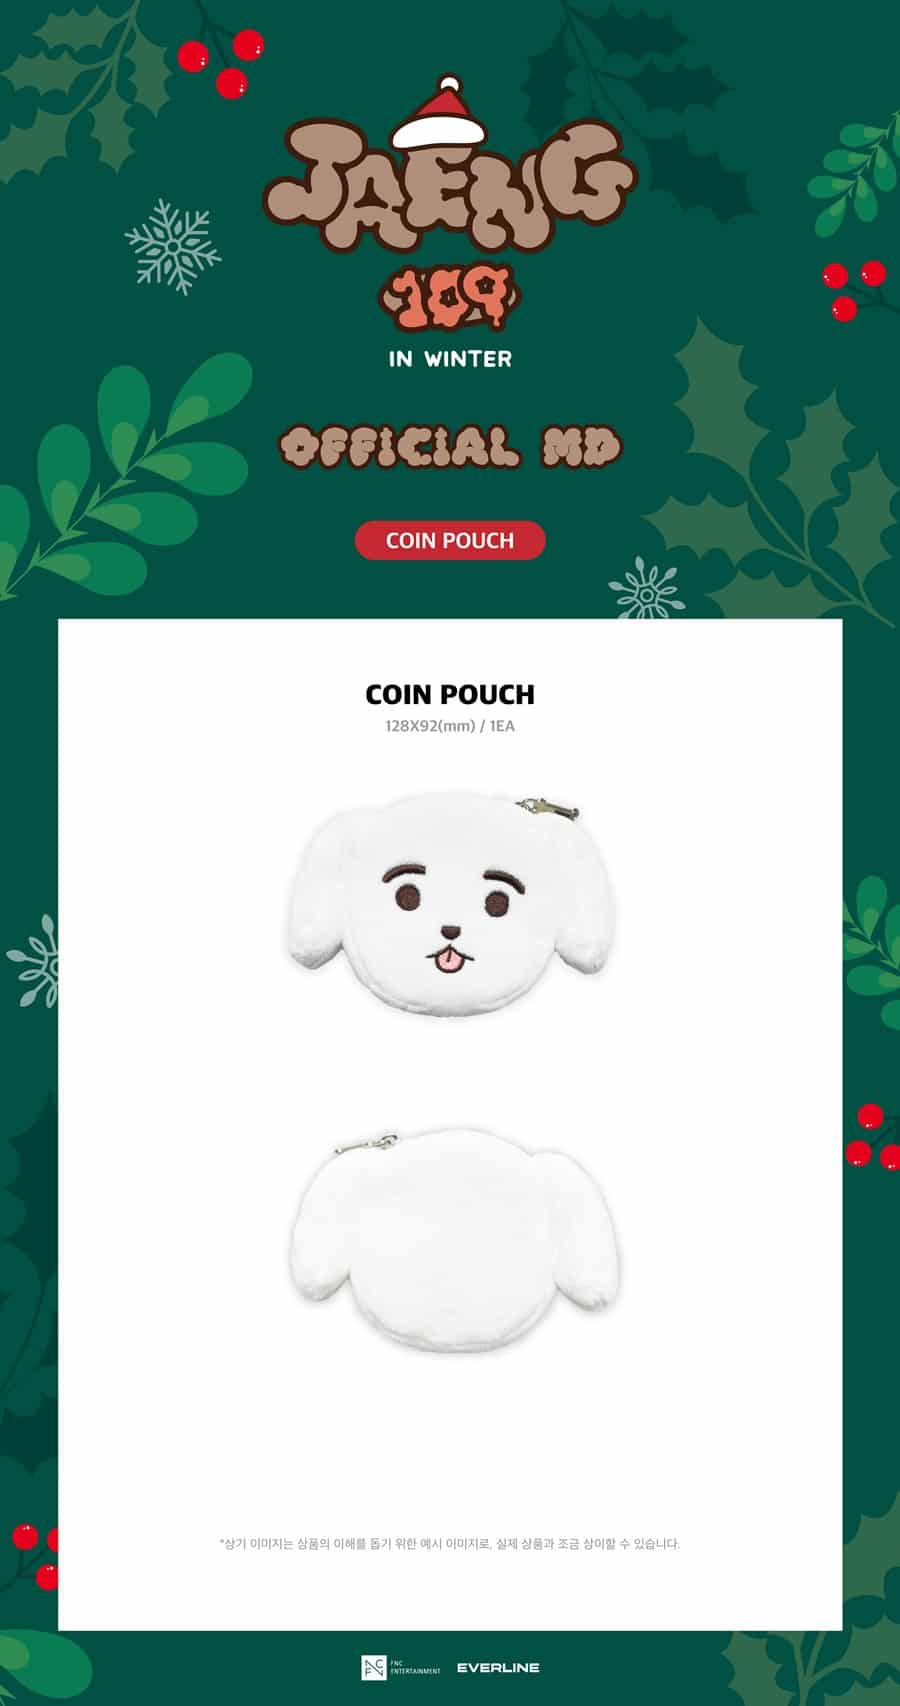 jaeng109-in-winter-pop-up-official-md-coin-pouch-wholesales